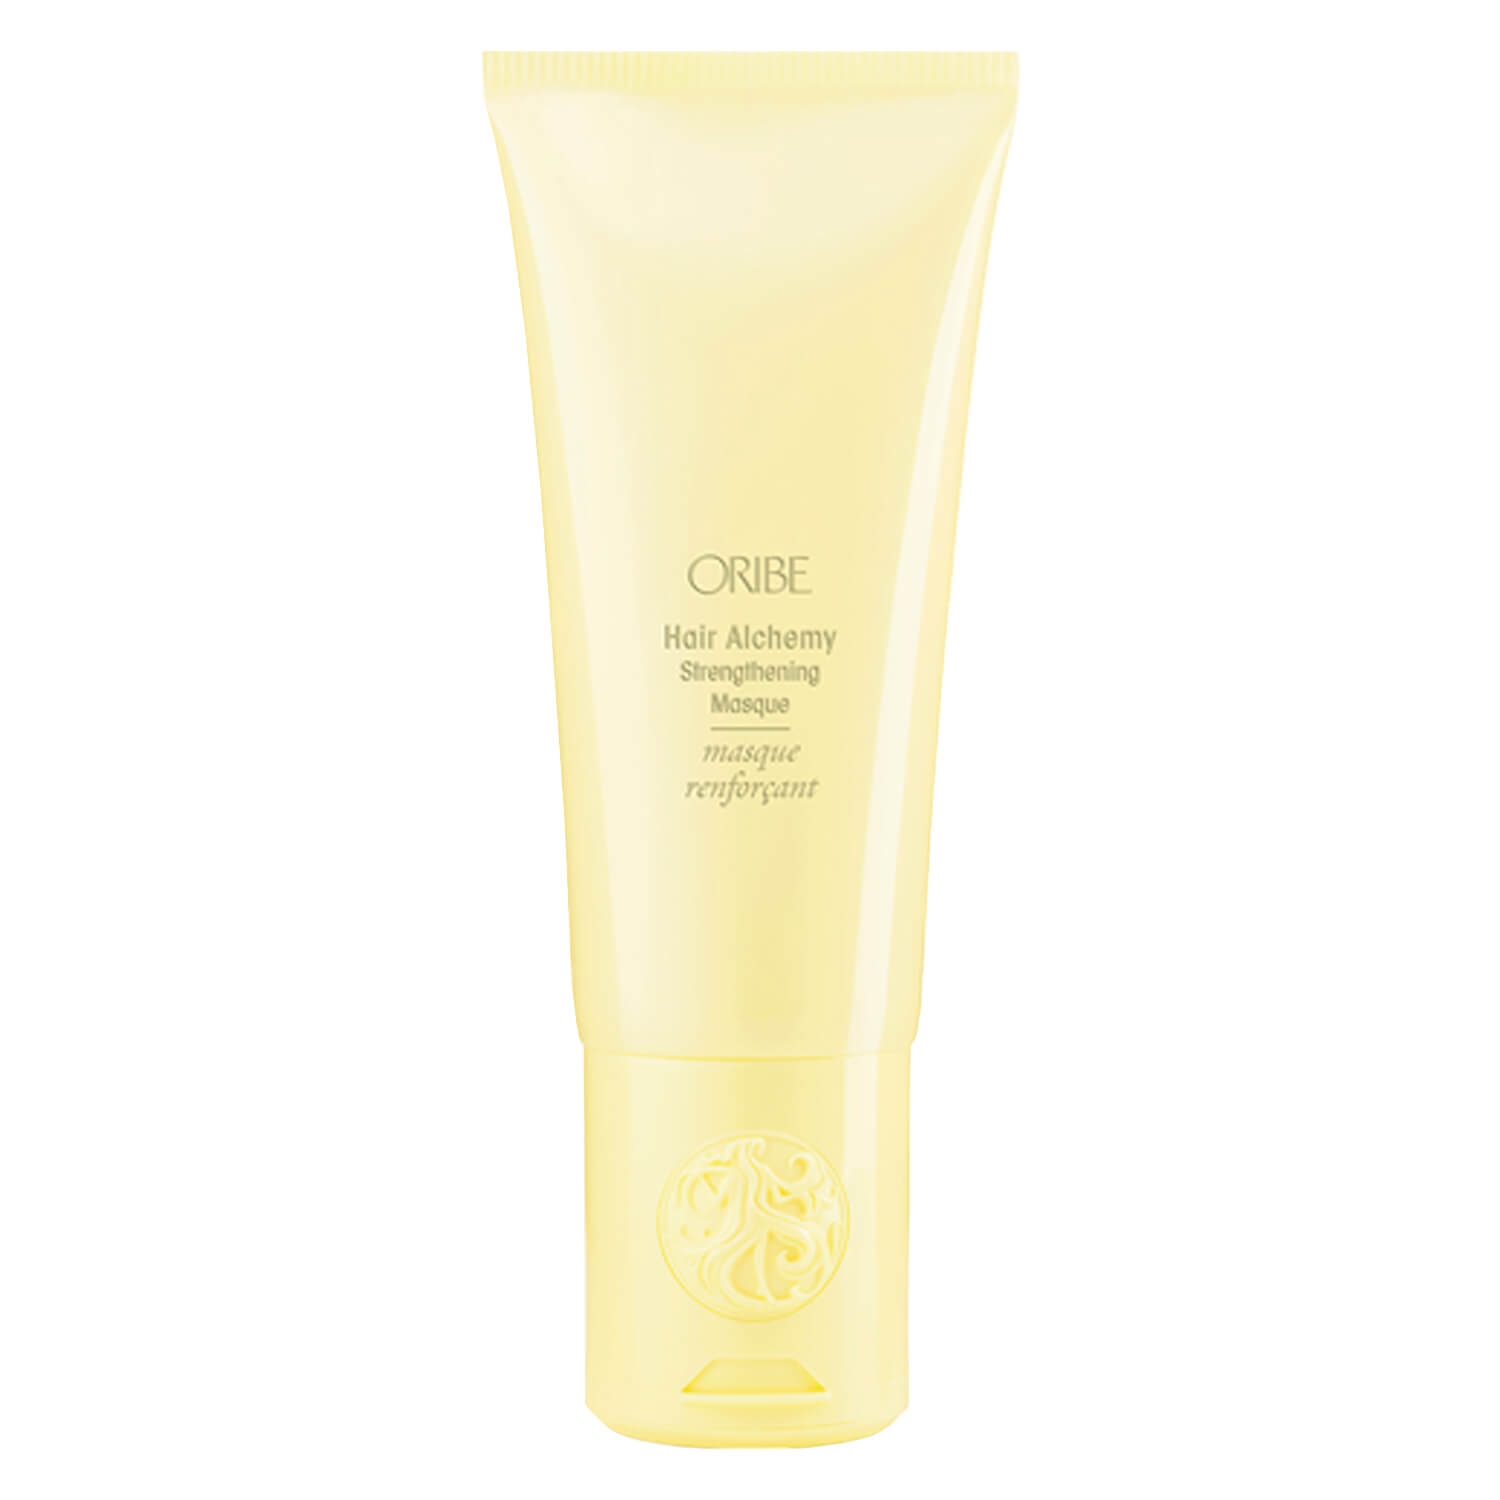 Product image from Oribe Care - Hair Alchemy Strengthening Masque